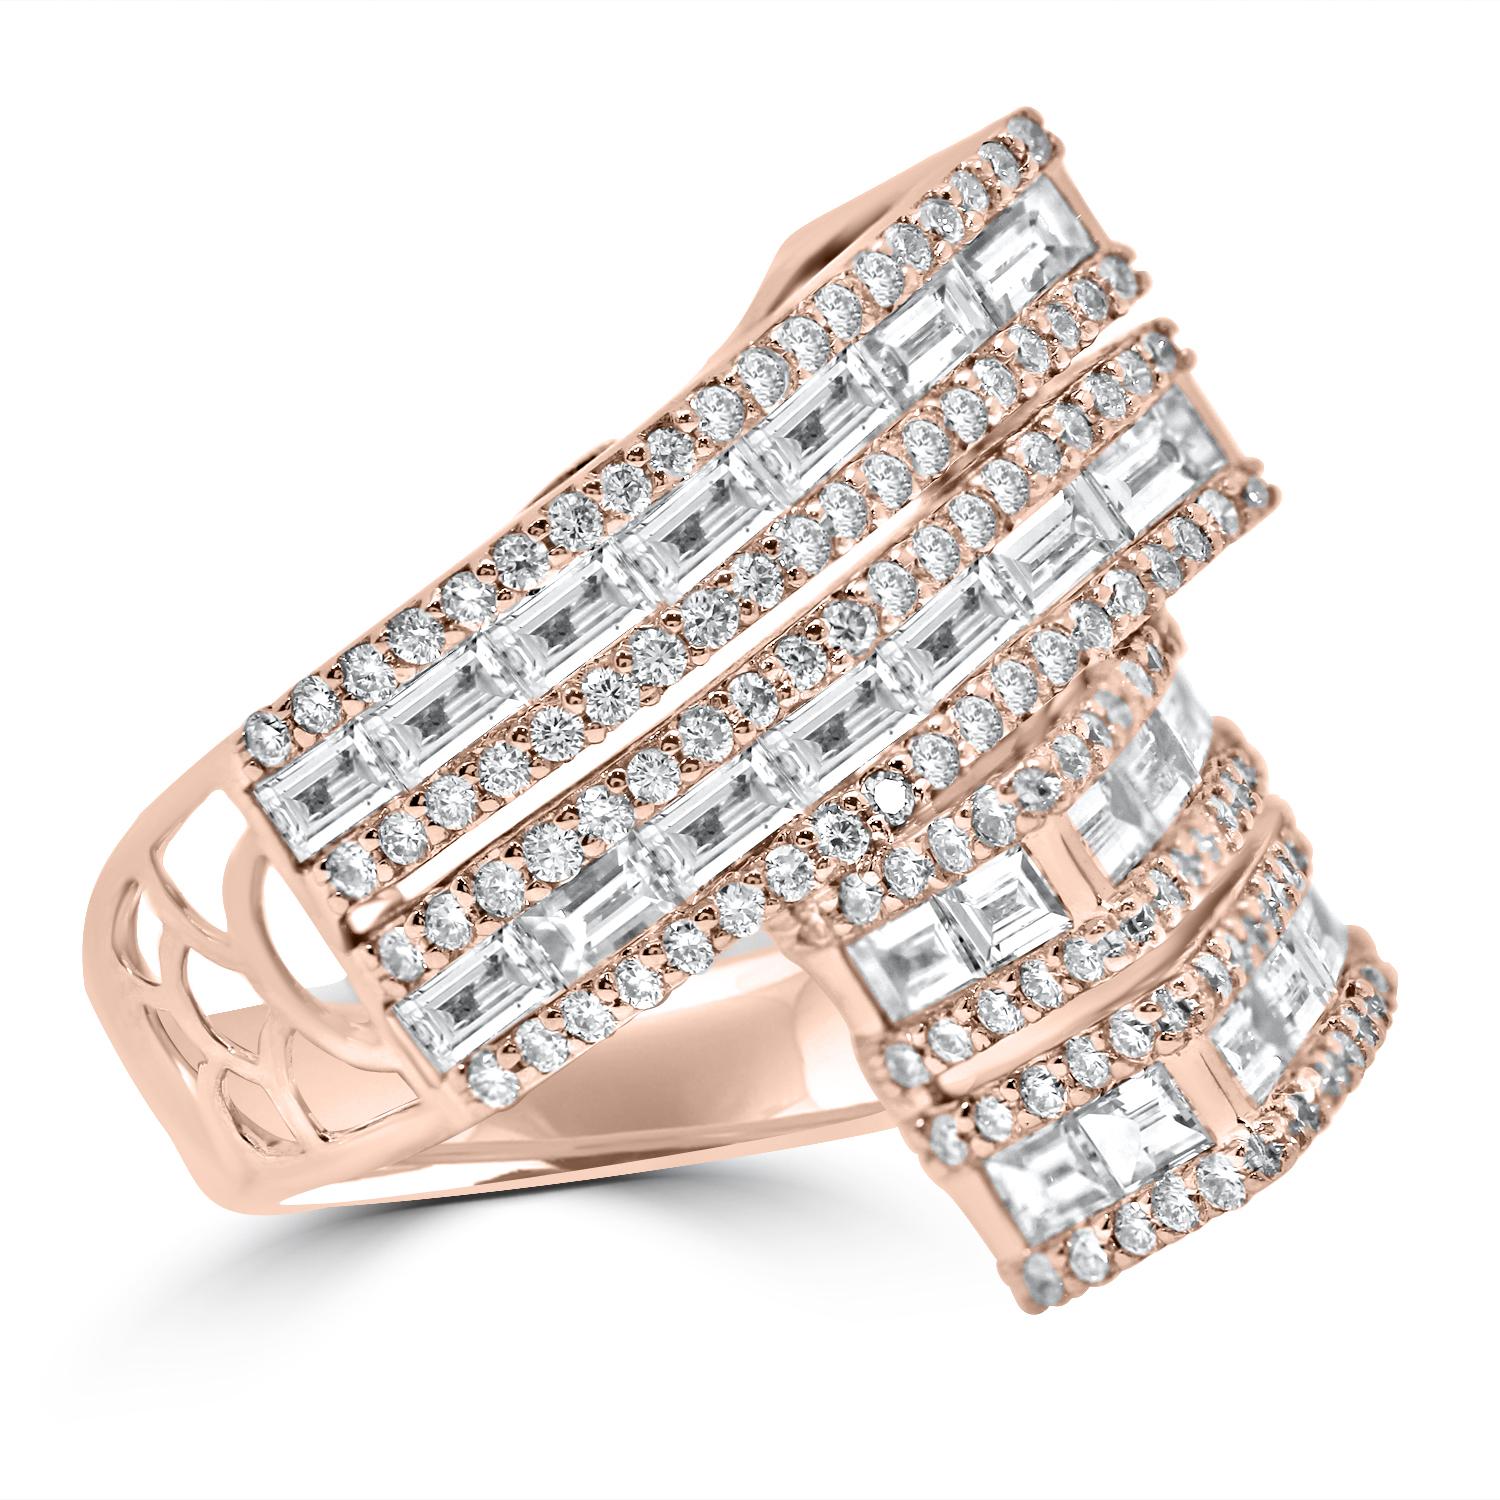 A beautiful 18 Karat Rose Gold ring embedded with Baguette and Brilliant Diamonds with a total weight of 3,13 Carats. The diamonds range between E and F colour and a VVS clarity.
This piece was crafted in Antwerp, Belgium. Made in 2018, this piece